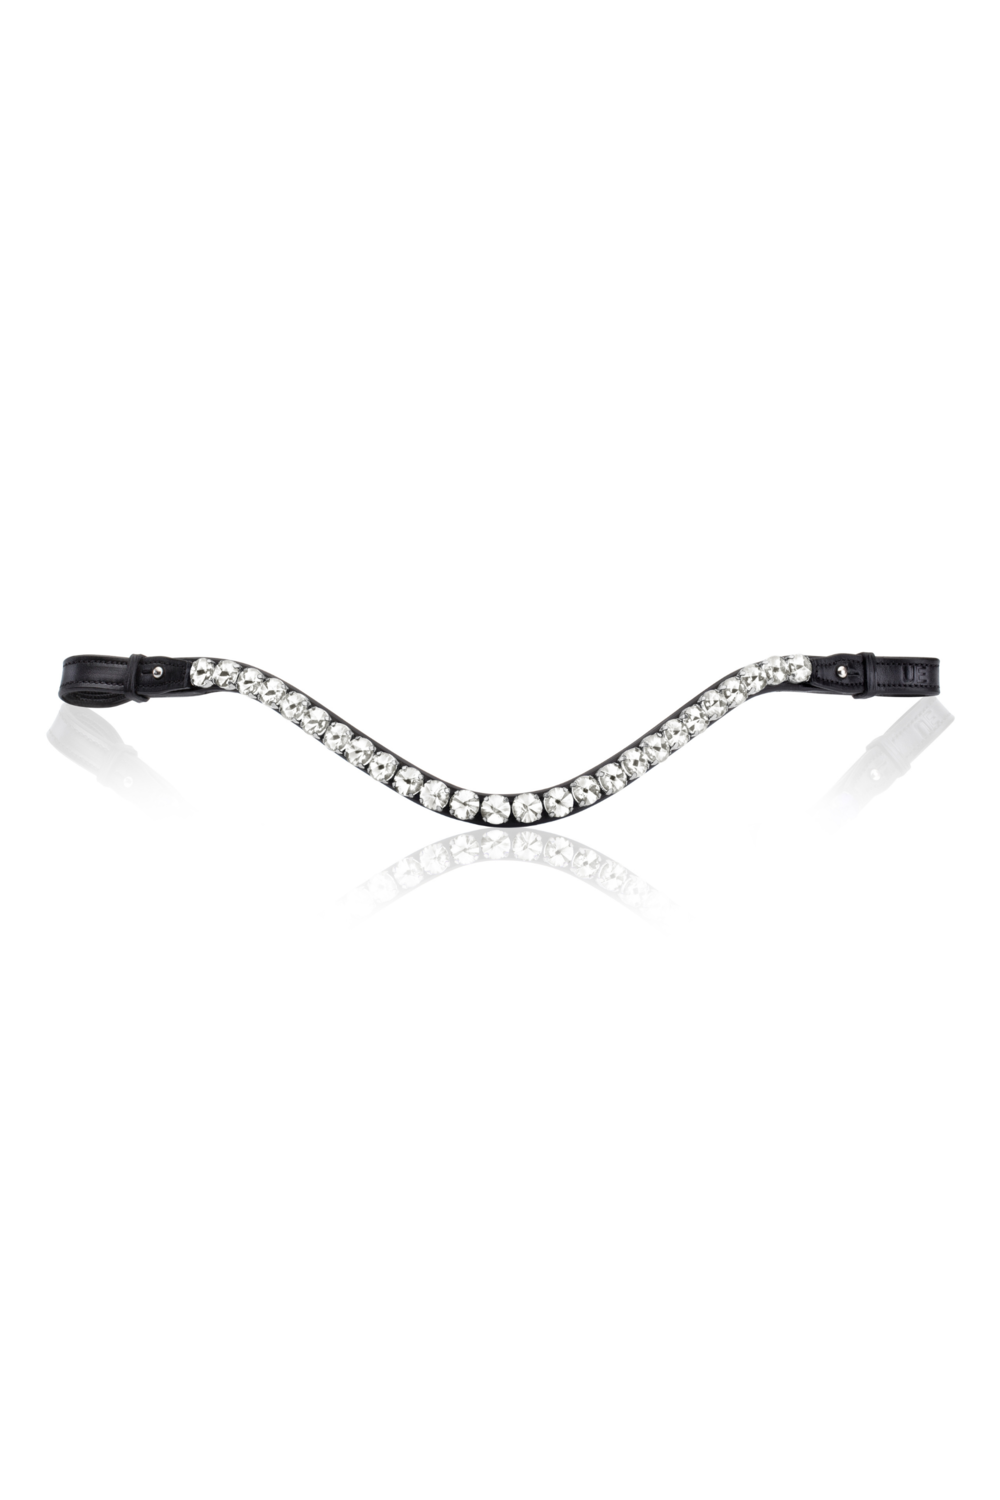 Utzon Empire Browband Clear